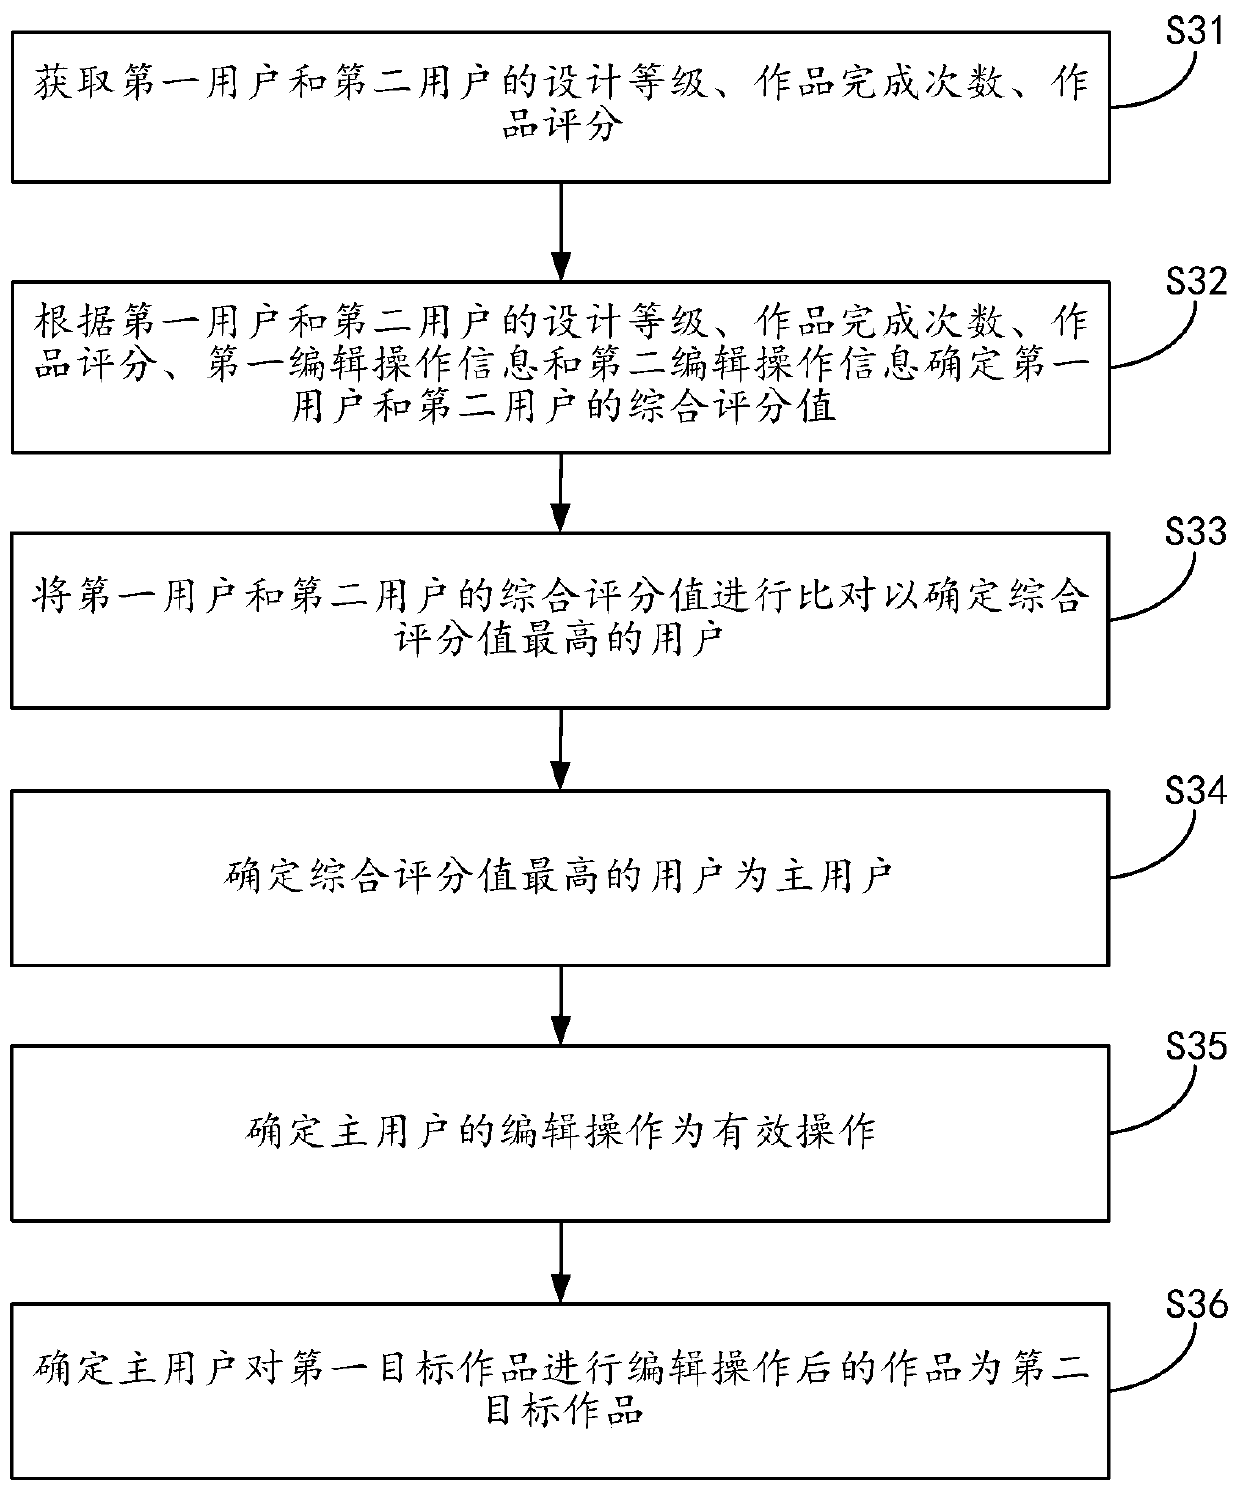 Interaction method for collaborative participation of designers